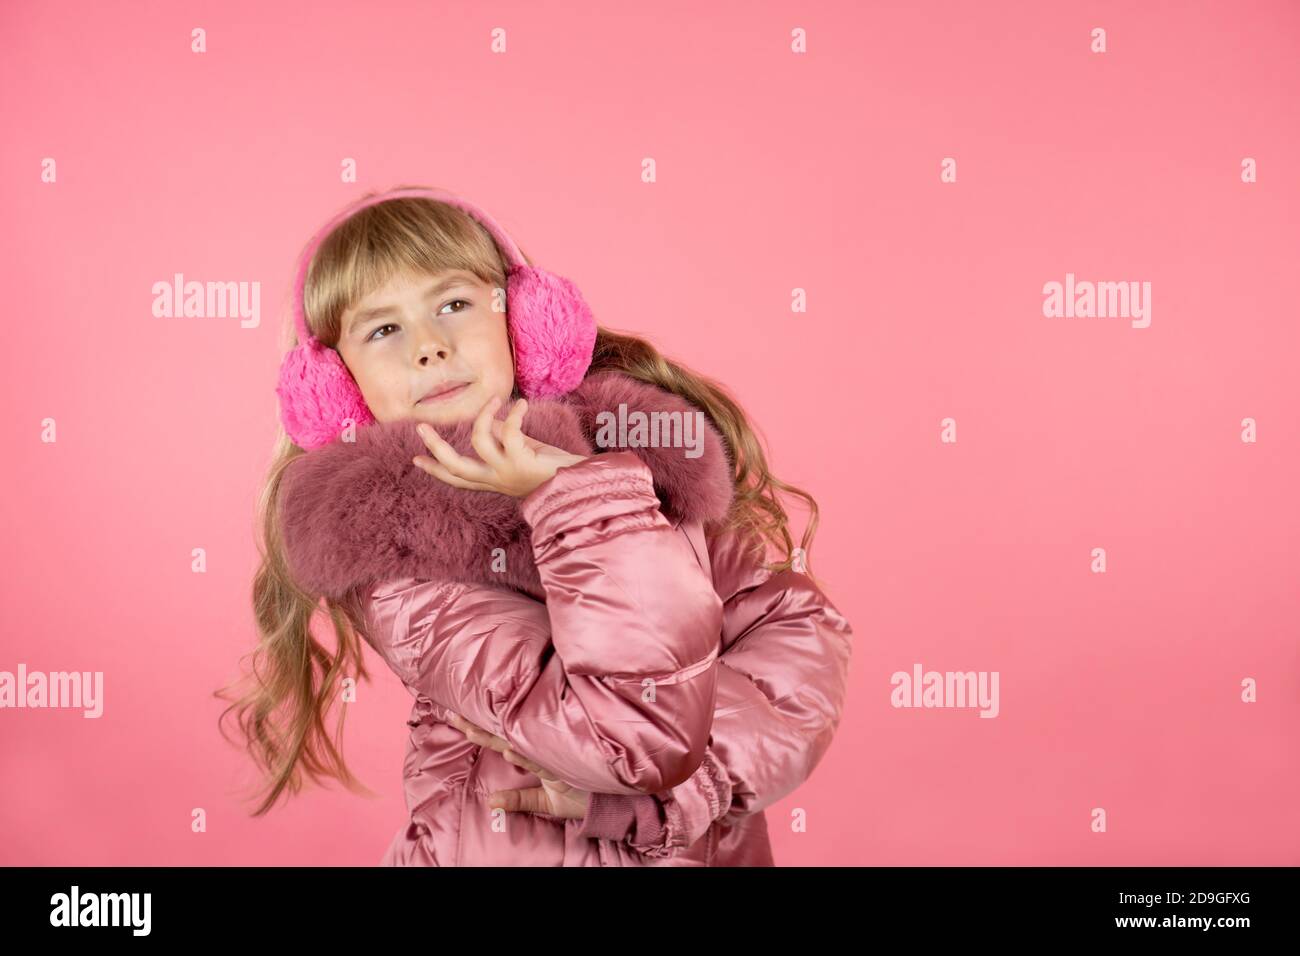 Little girl in a winter pink coat on a pink background. Stock Photo